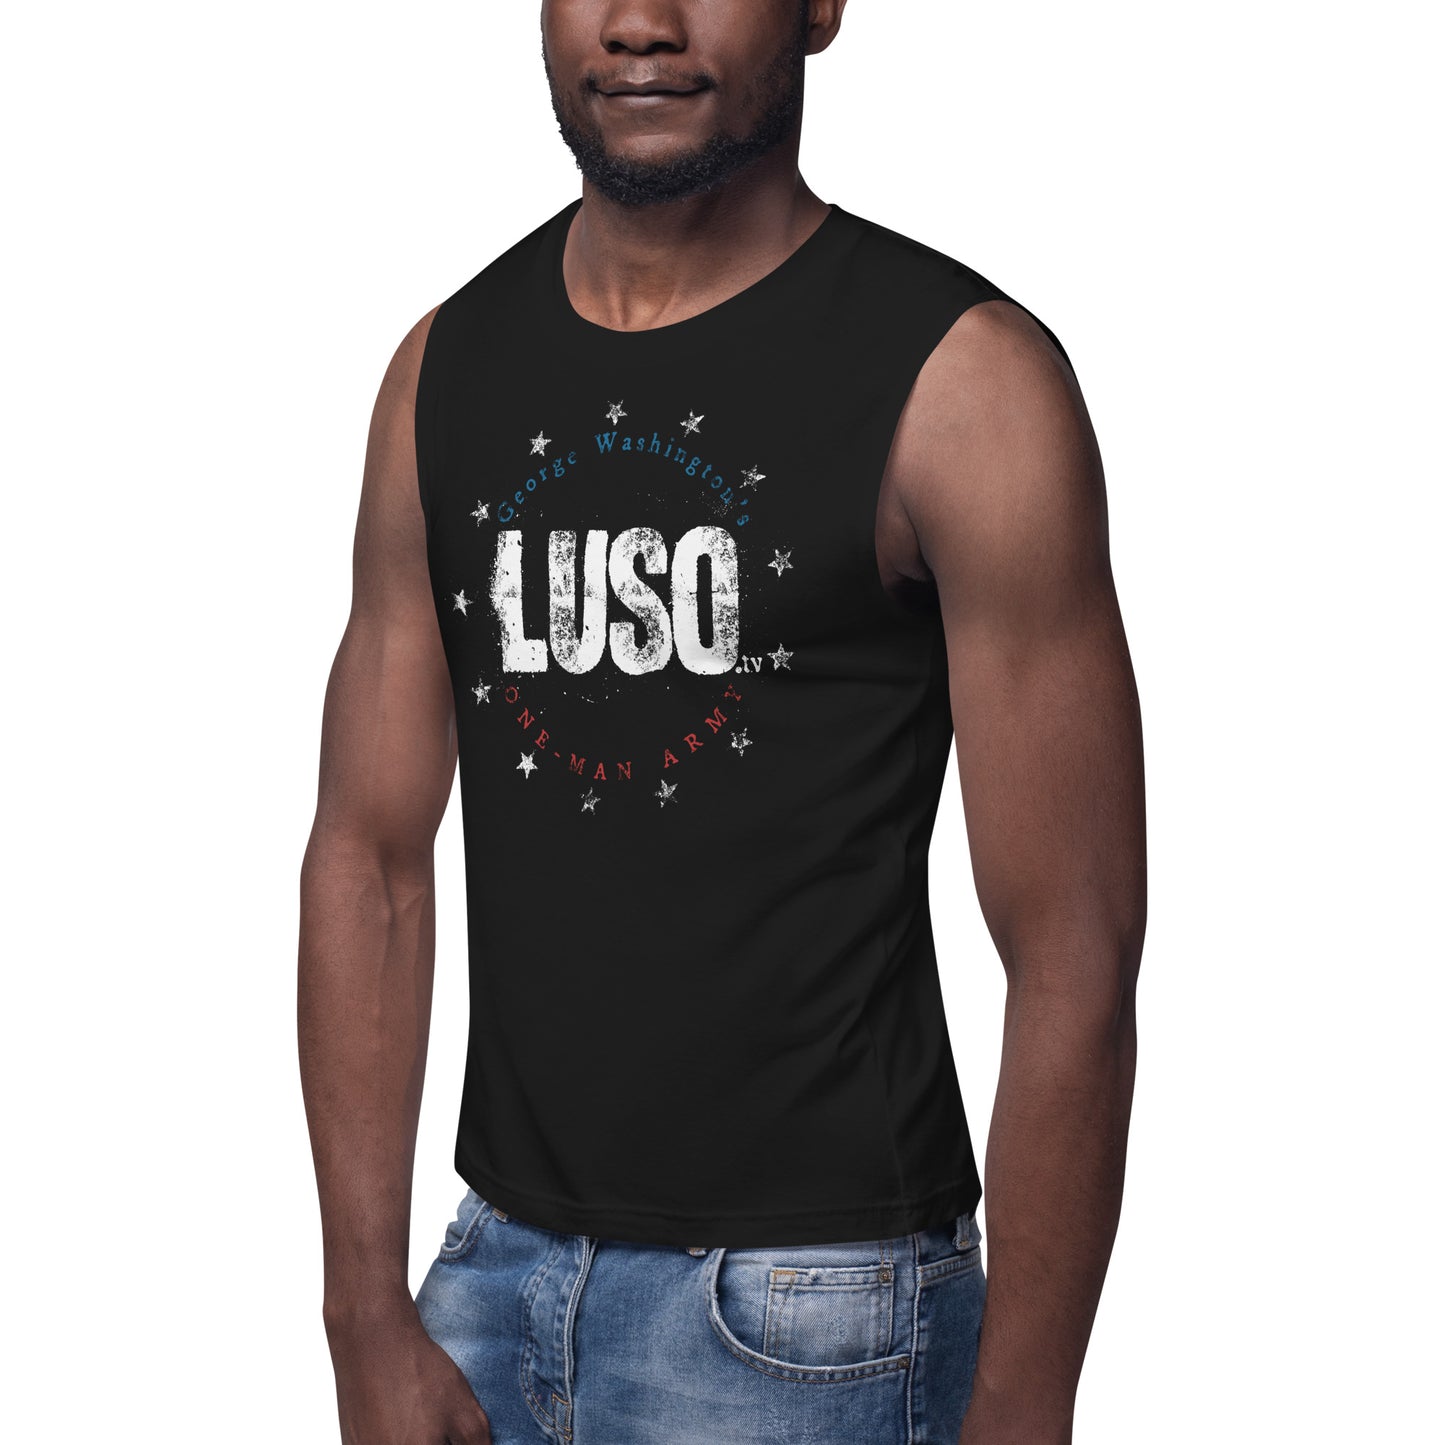 LUSO One Man Army Muscle Shirt